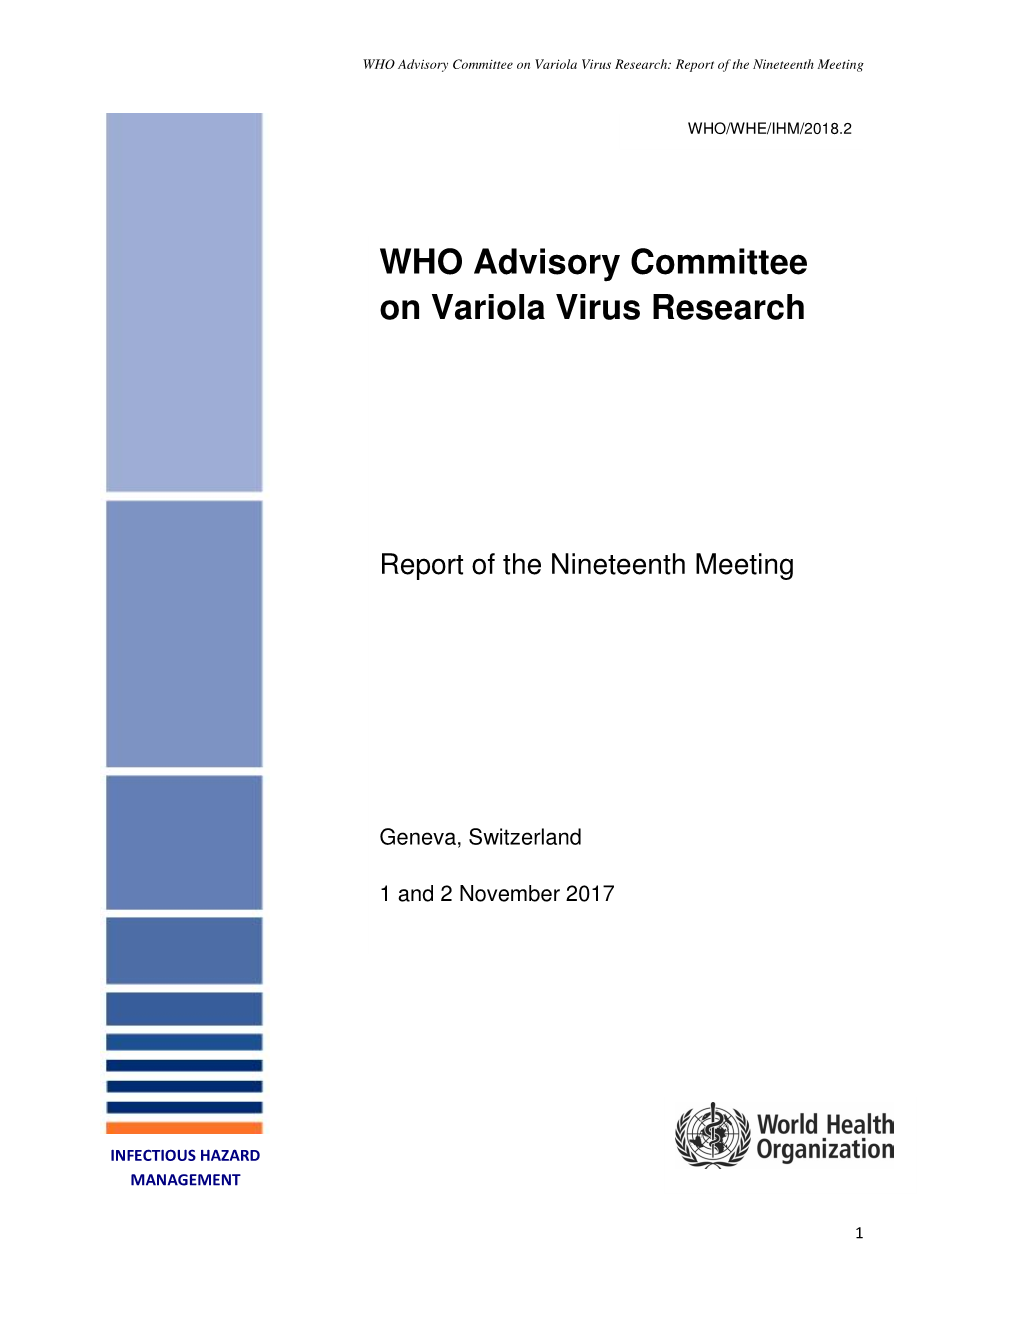 WHO Advisory Committee on Variola Virus Research: Report of the Nineteenth Meeting